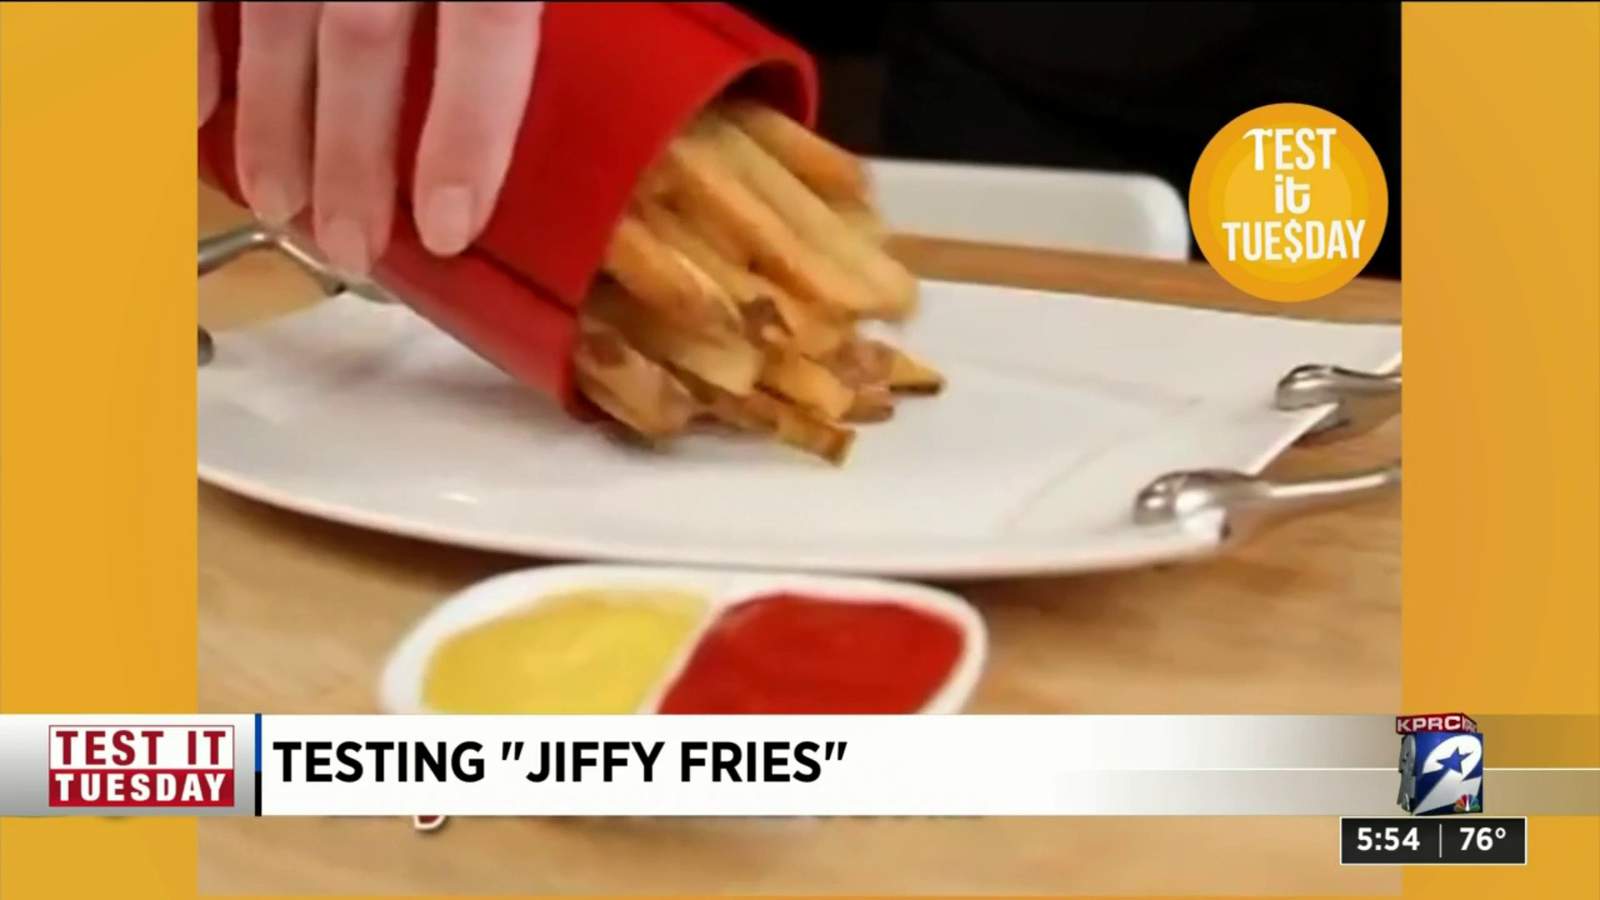 Test it Tuesday: Jiffy Fries claims to make perfect french fries in minutes